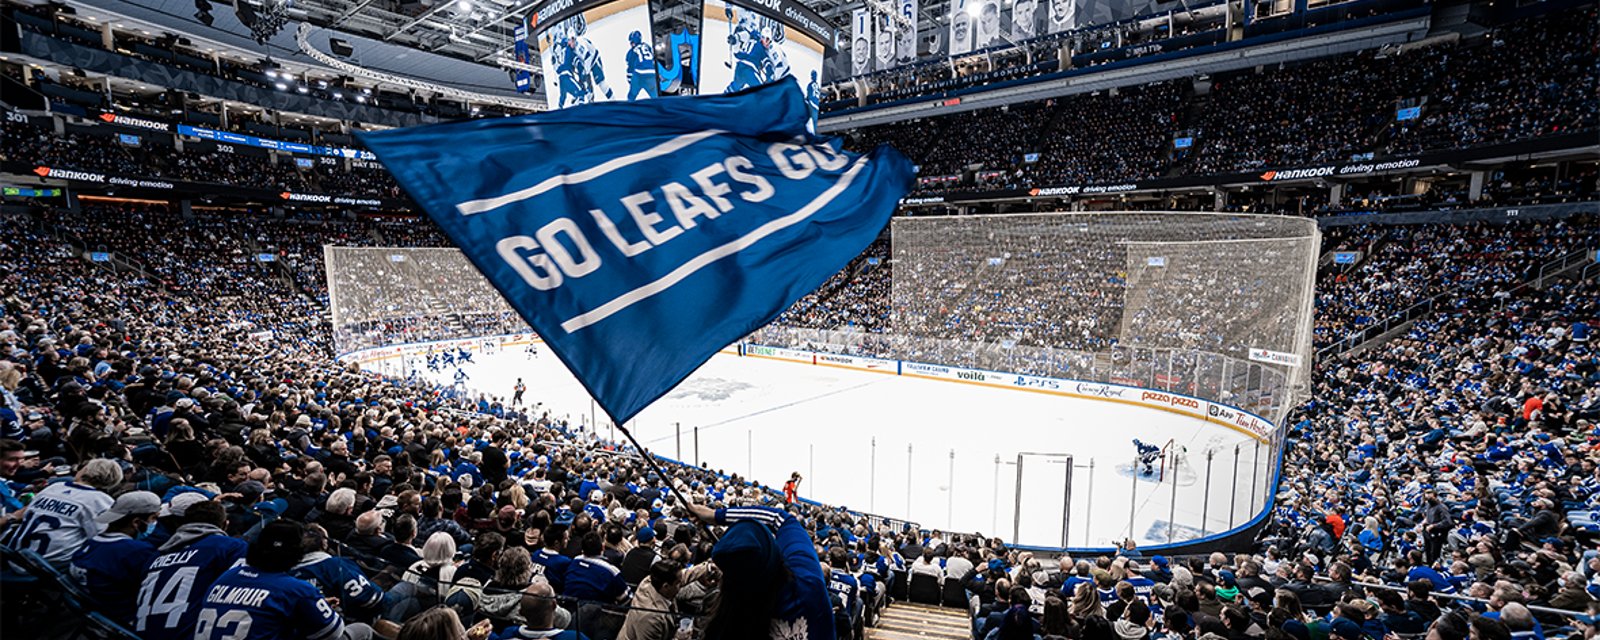 Leafs home game prices are absurdly high